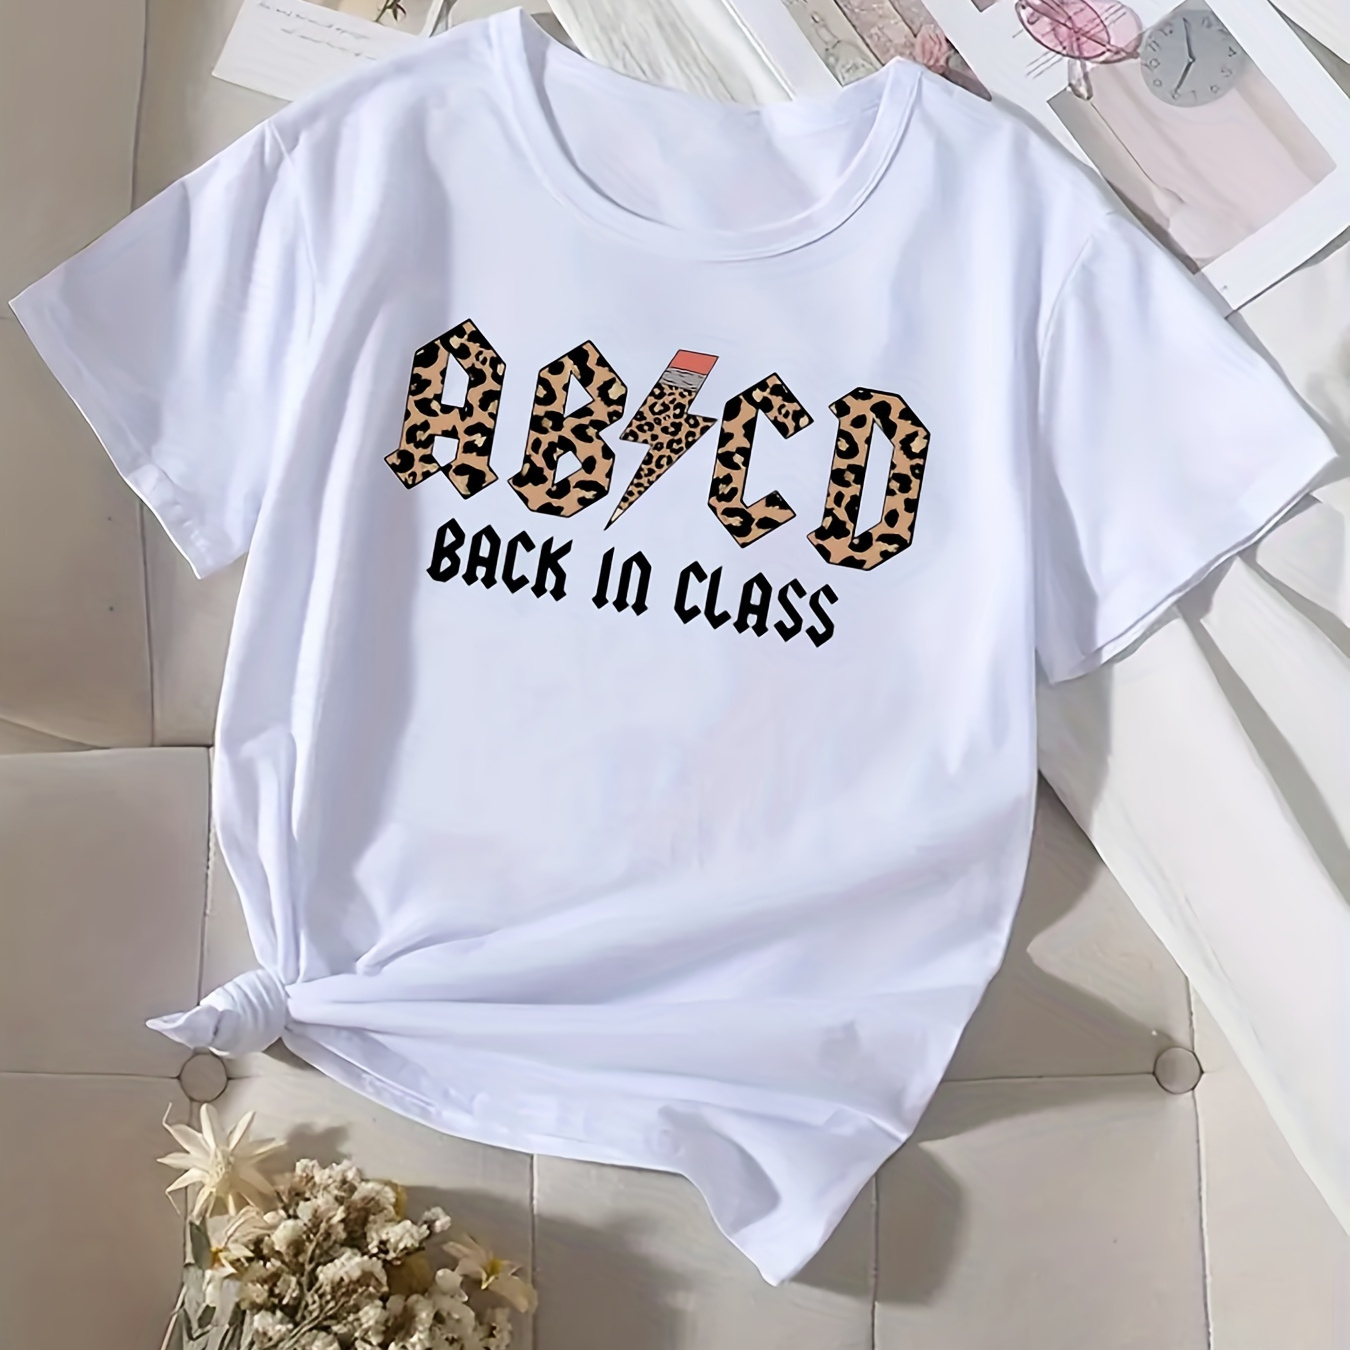 

Back Class Print Crew Neck T-shirt, Short Sleeve Casual Top For Summer & Spring, Women's Clothing